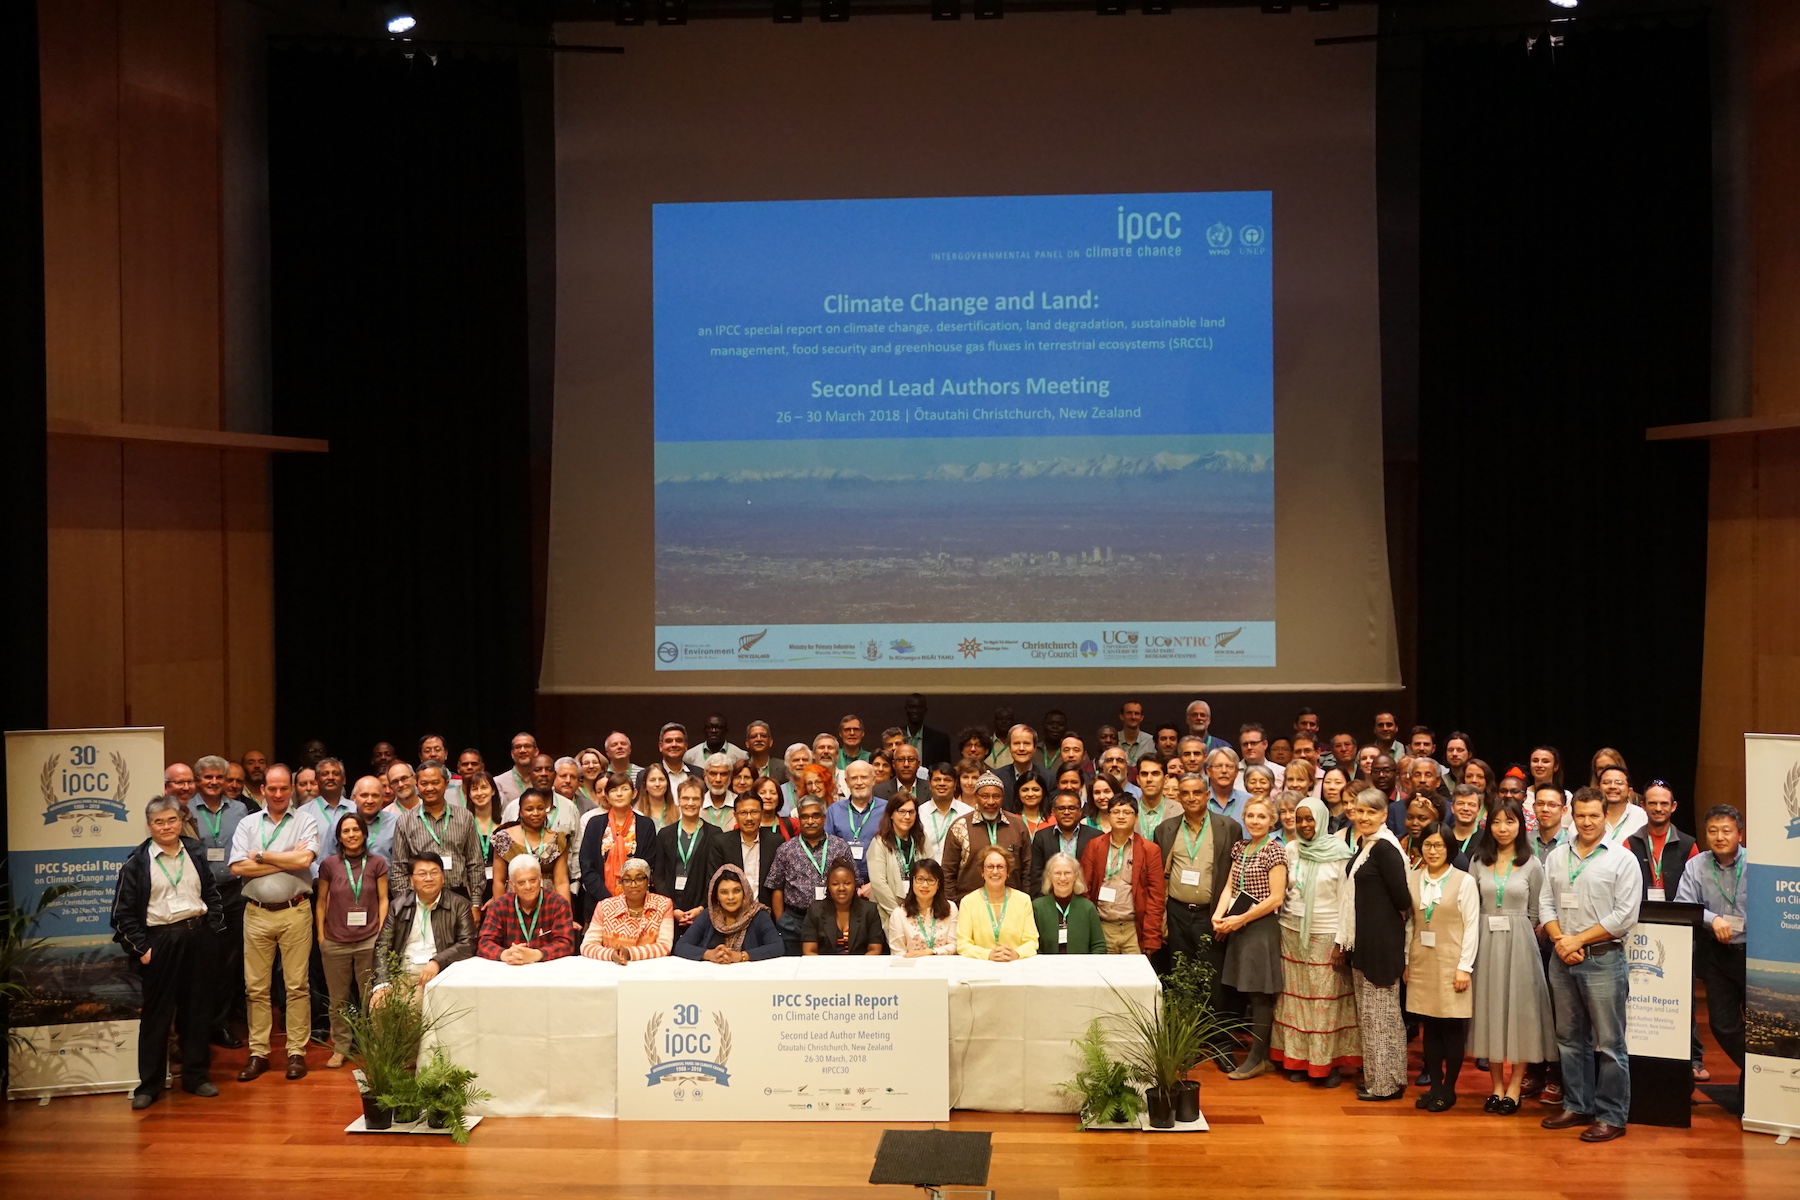 Tek Sapkota (center) stands for a group photo with other scientists working on the IPCC’s special report on climate change and land, at the second lead author meeting in Christchurch, New Zealand, in March 2018.